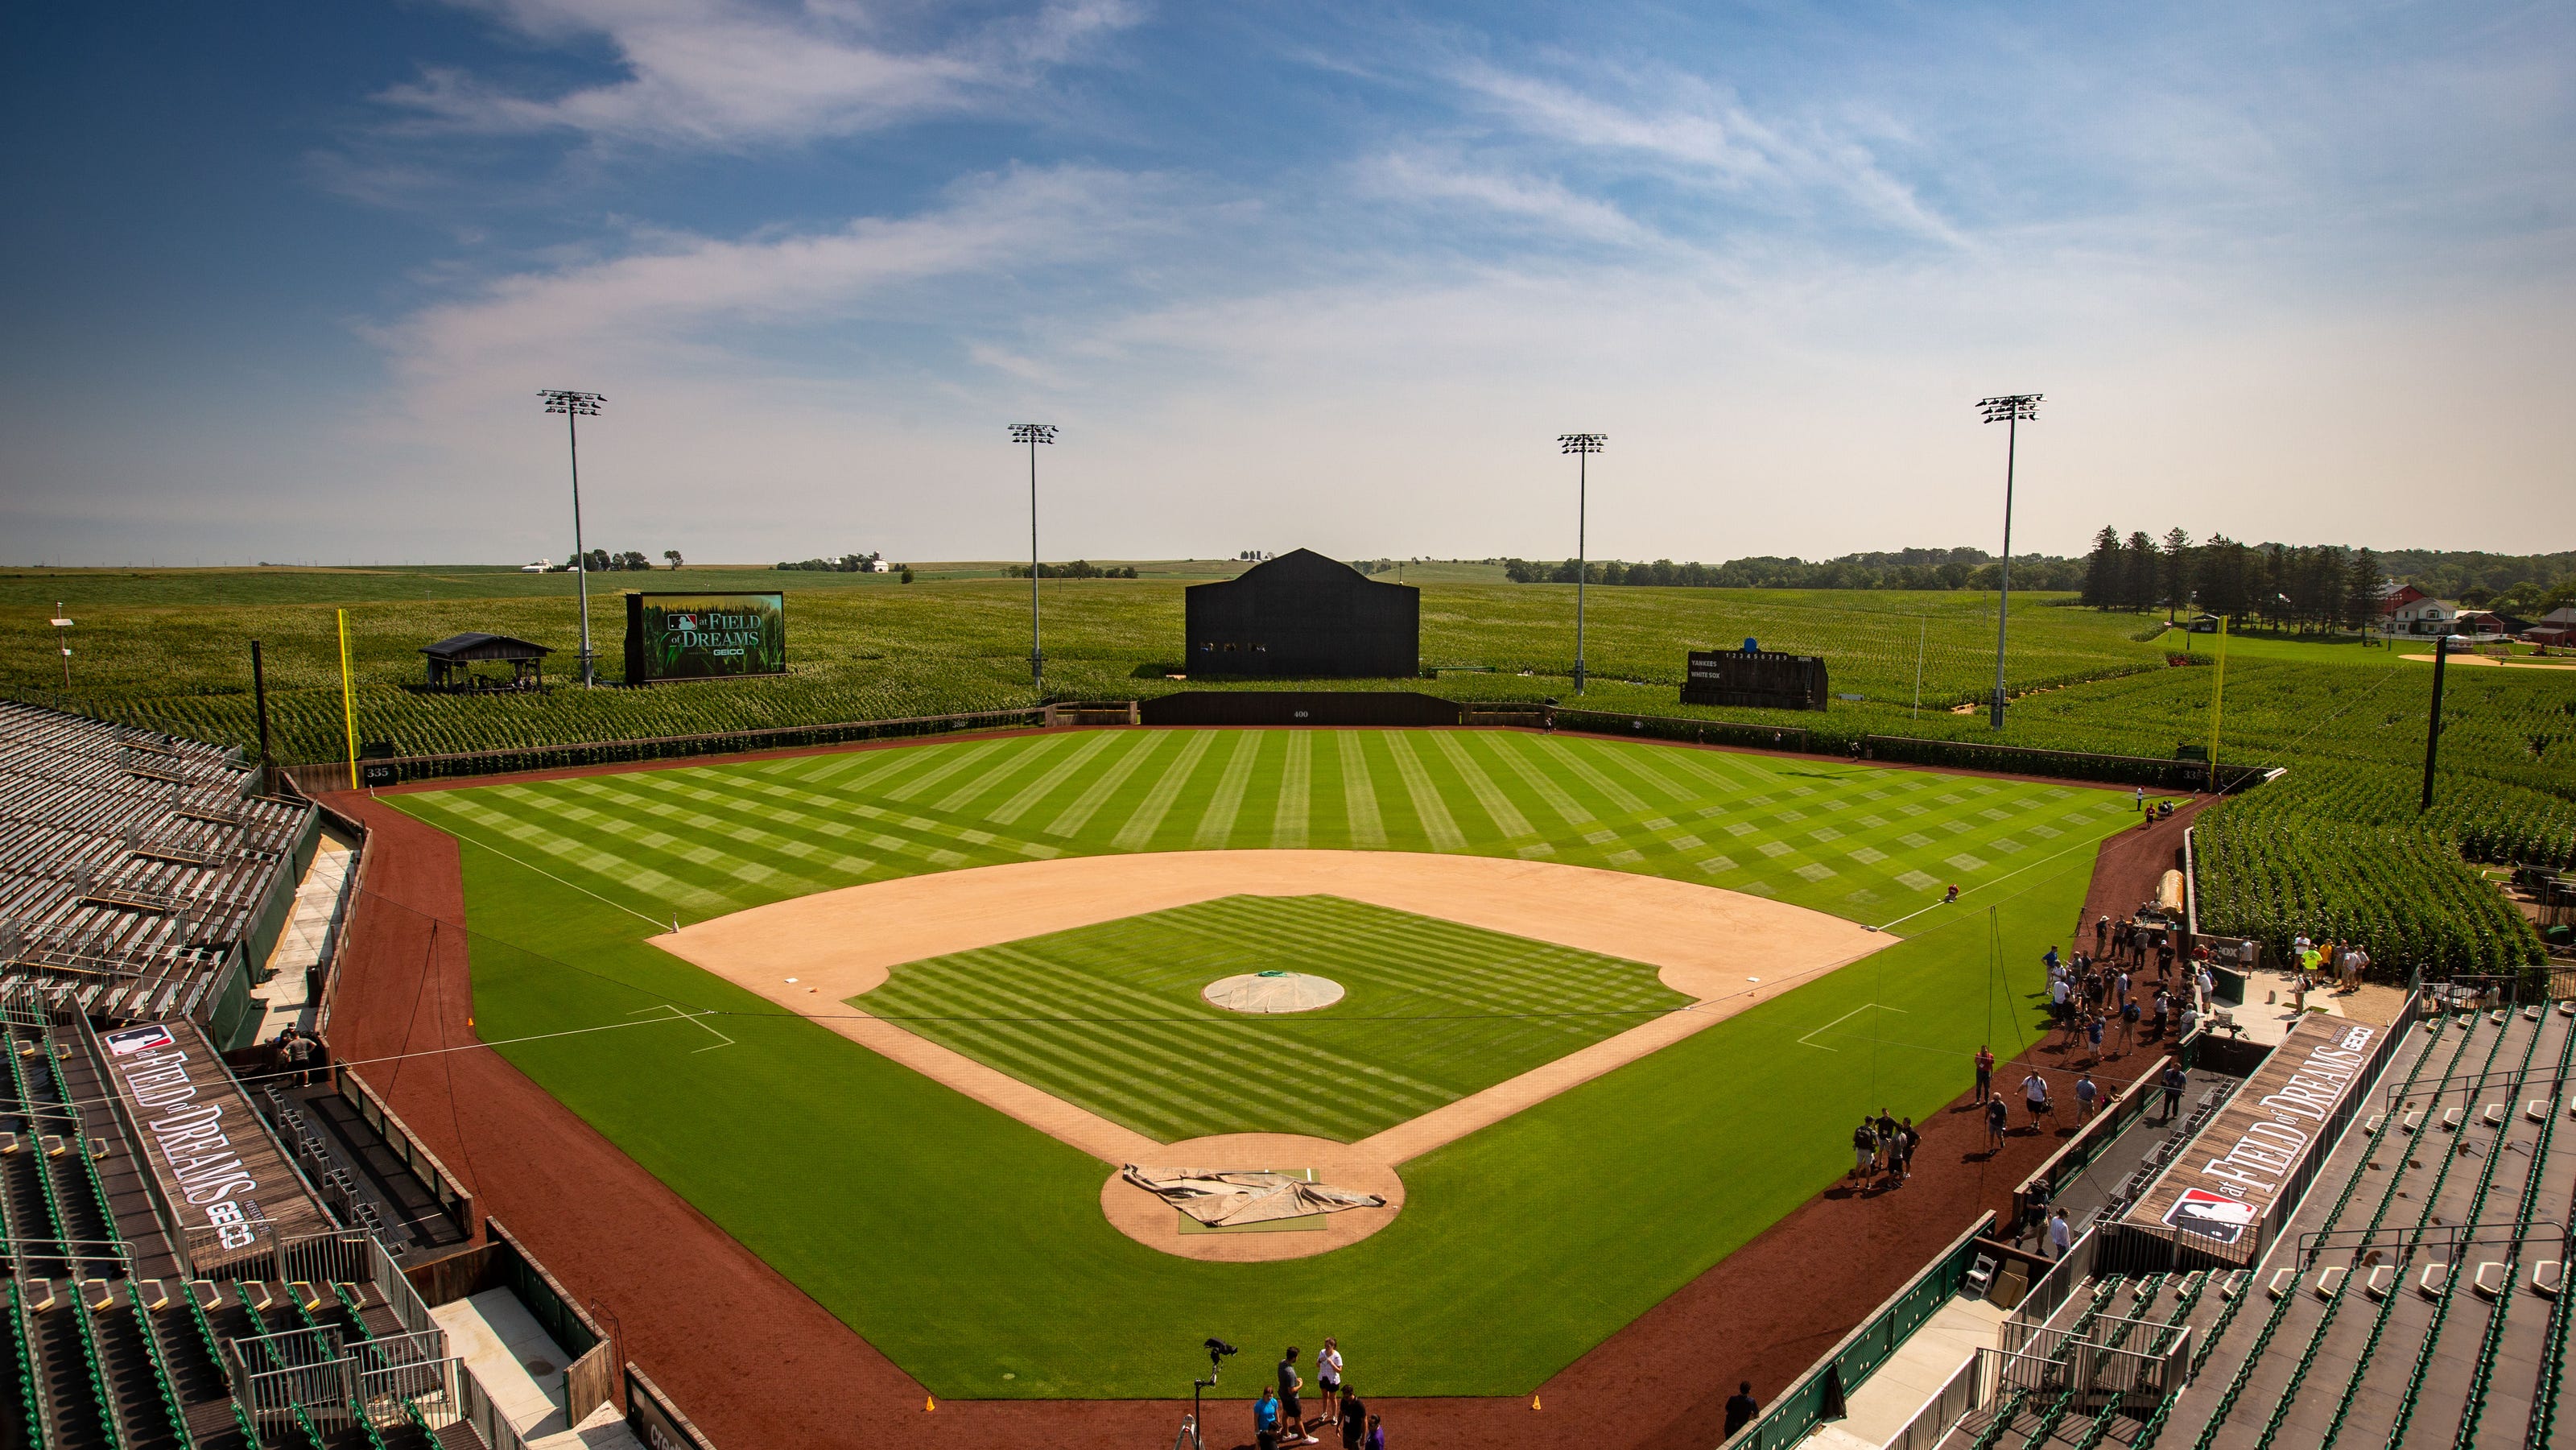 Yankees Field of Dreams game What to expect in Iowa